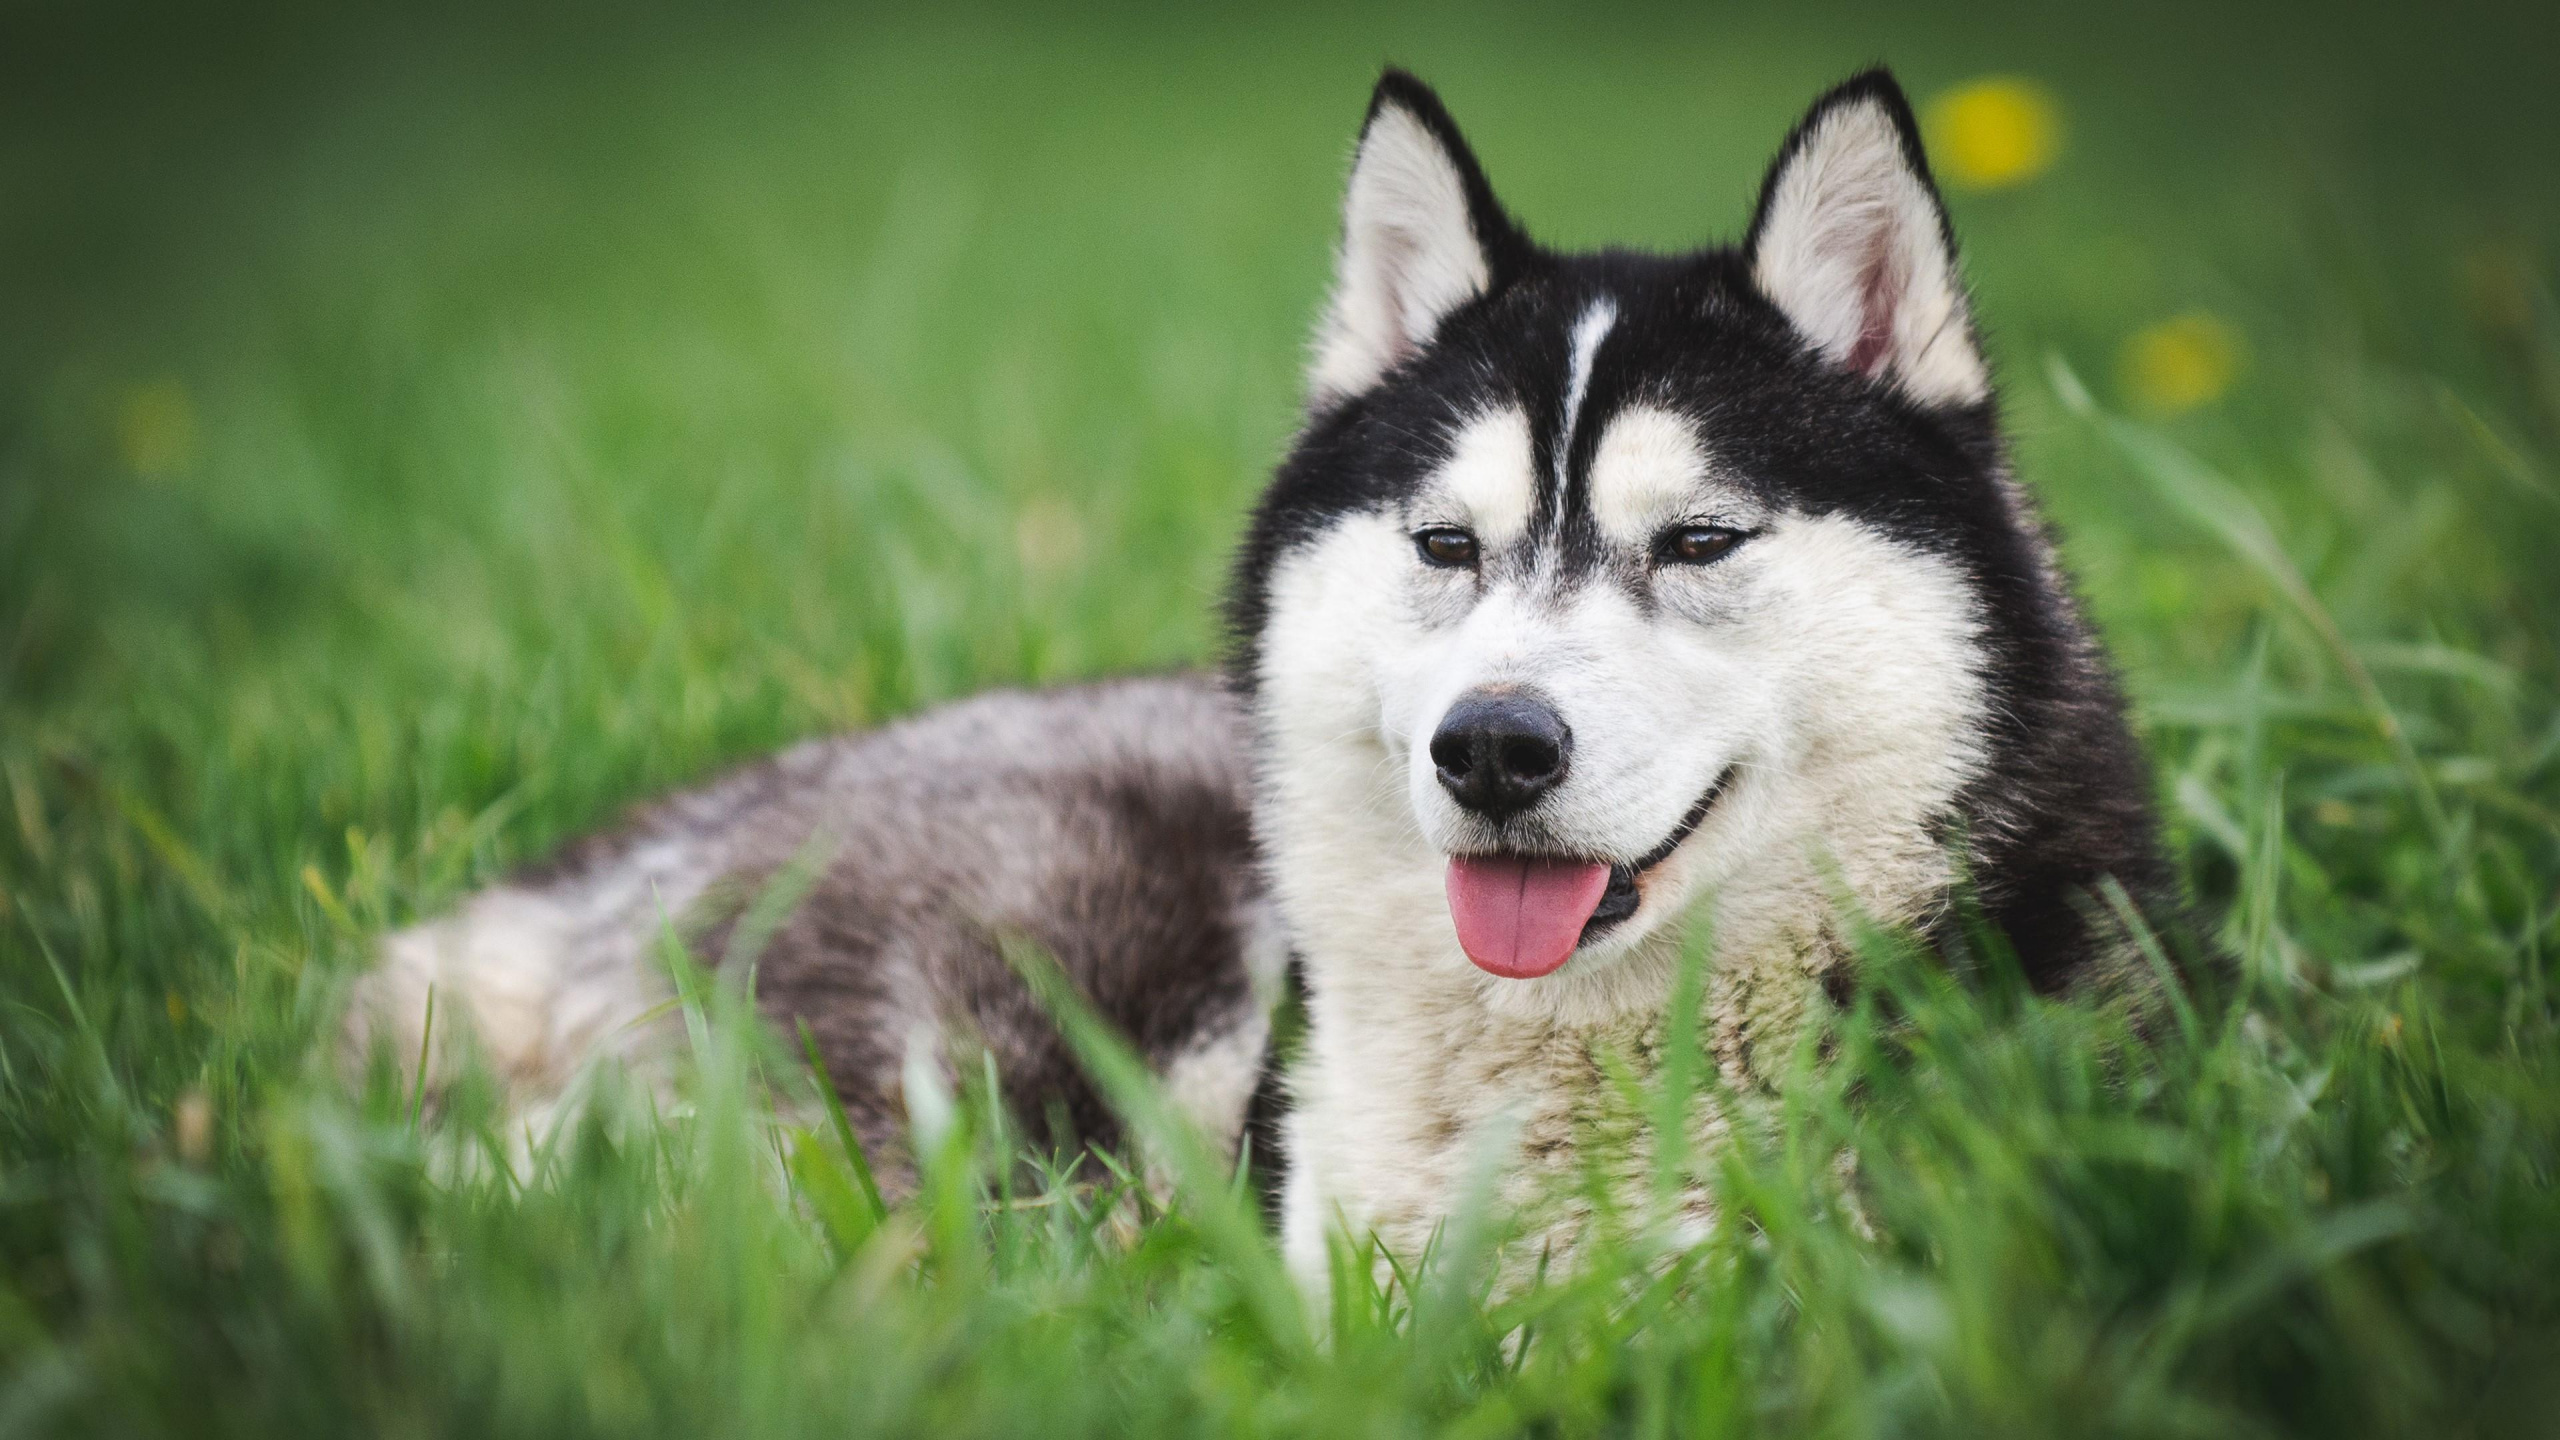 Black and White Siberian Husky on Green Grass Field During Daytime. Wallpaper in 2560x1440 Resolution